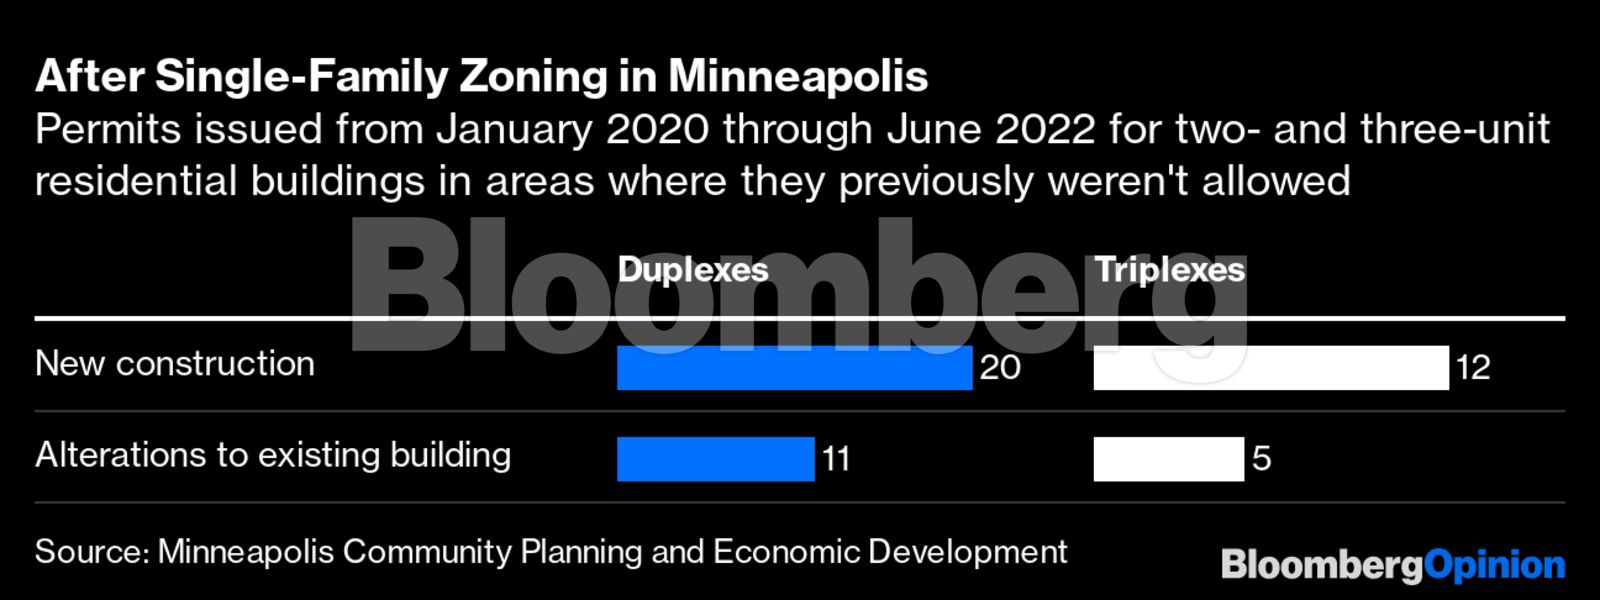 zone_simple_bar_chart_bloomberg_082222.png